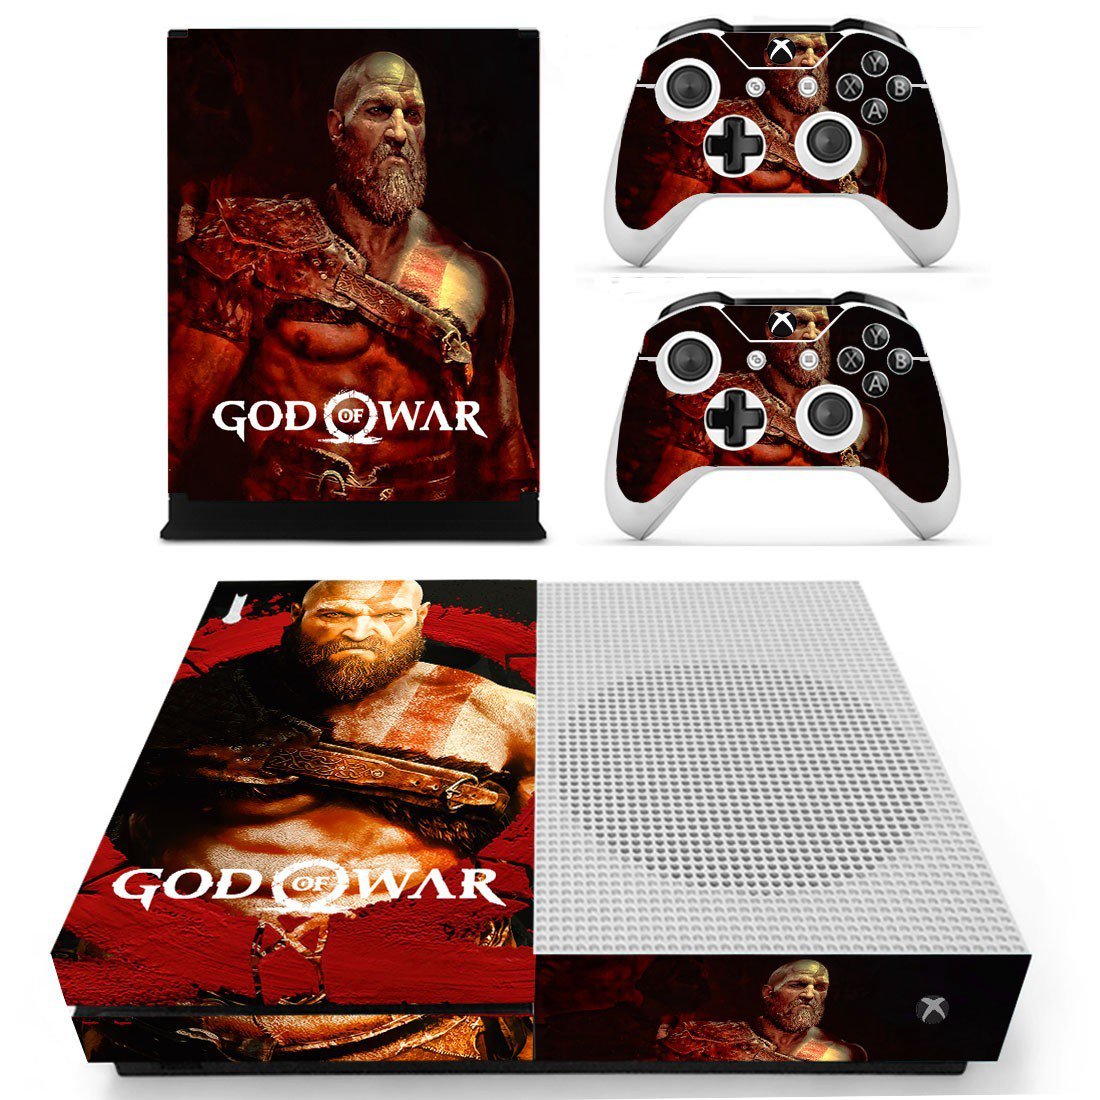 Xbox One S Skin Cover - God of War 4